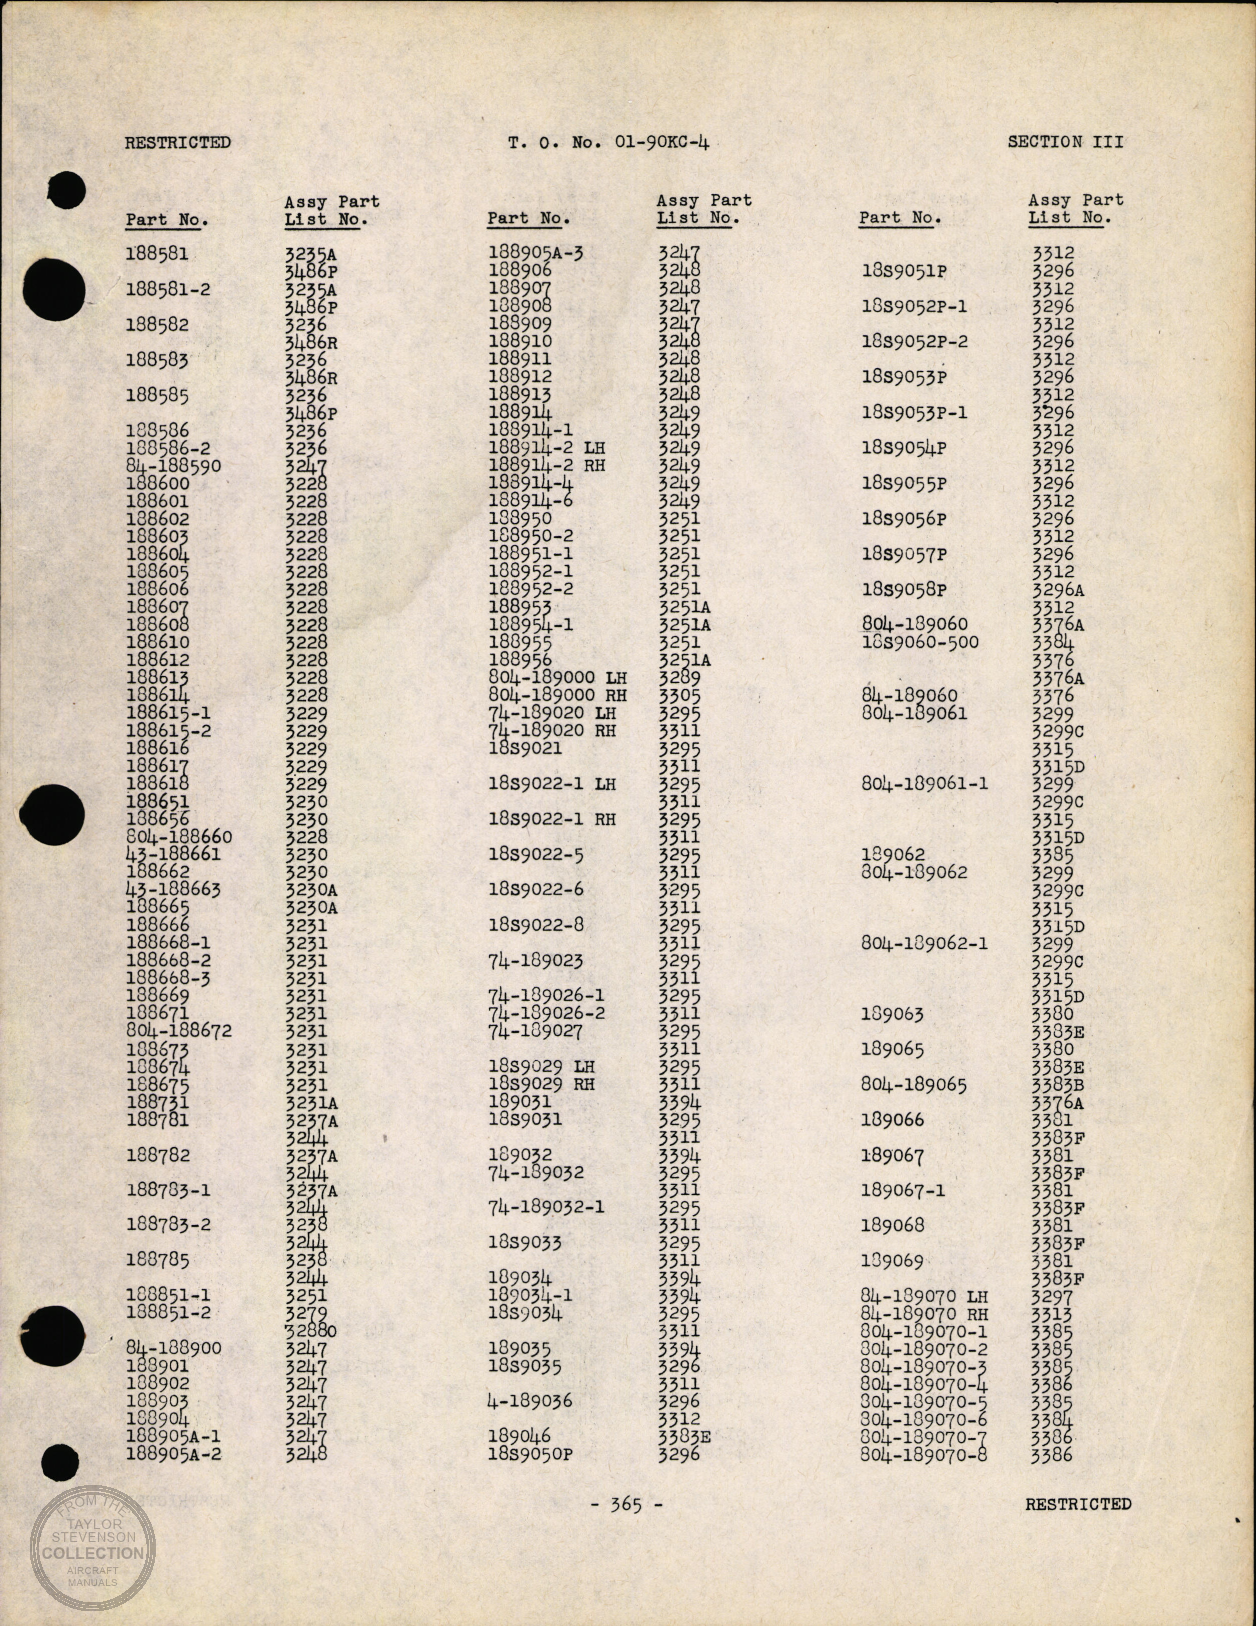 Sample page 309 from AirCorps Library document: Parts Catalog - AT-11